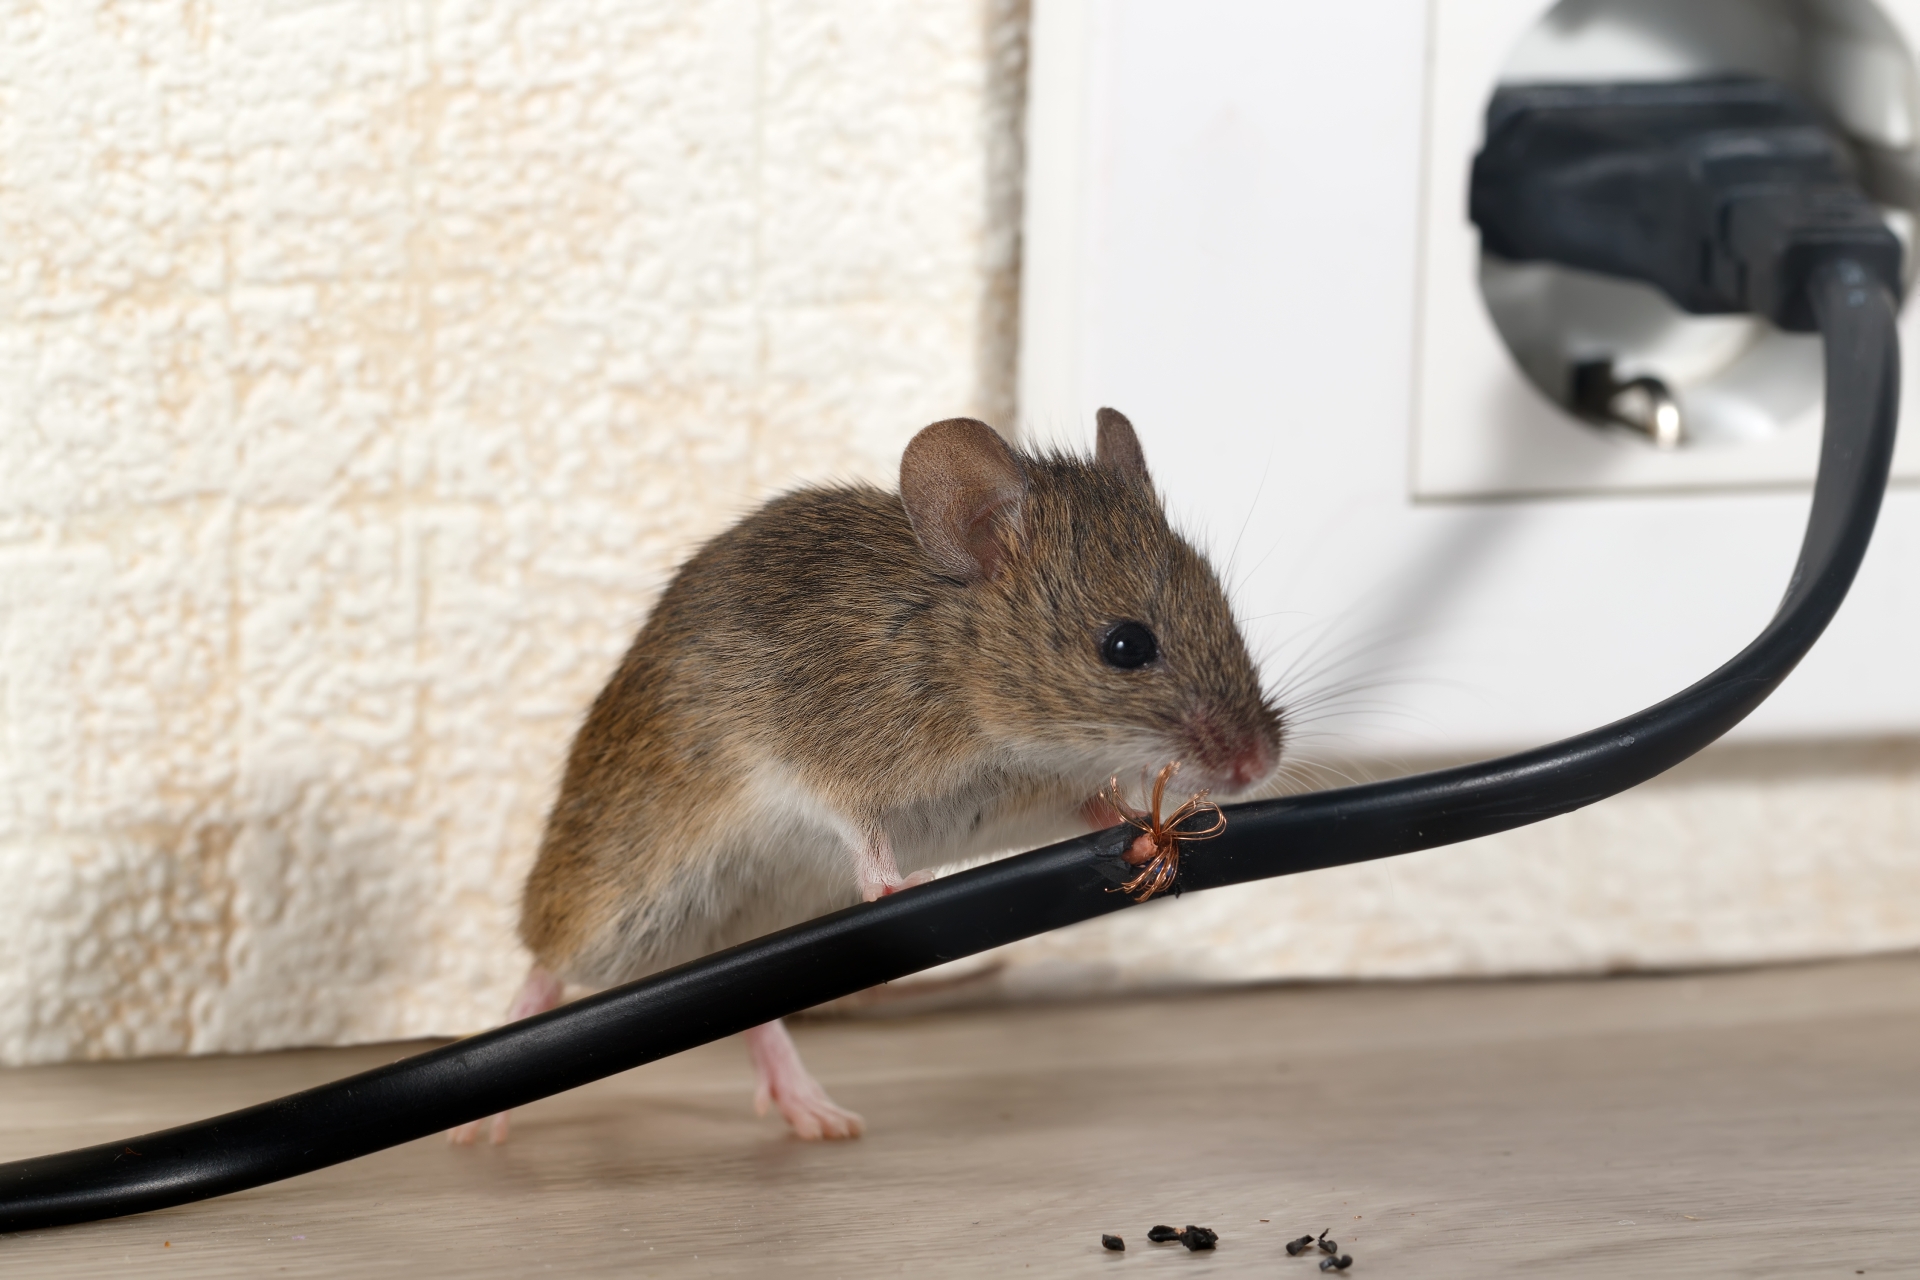 Mice Infestation, Pest Control in Falconwood, Welling, DA16. Call Now 020 8166 9746